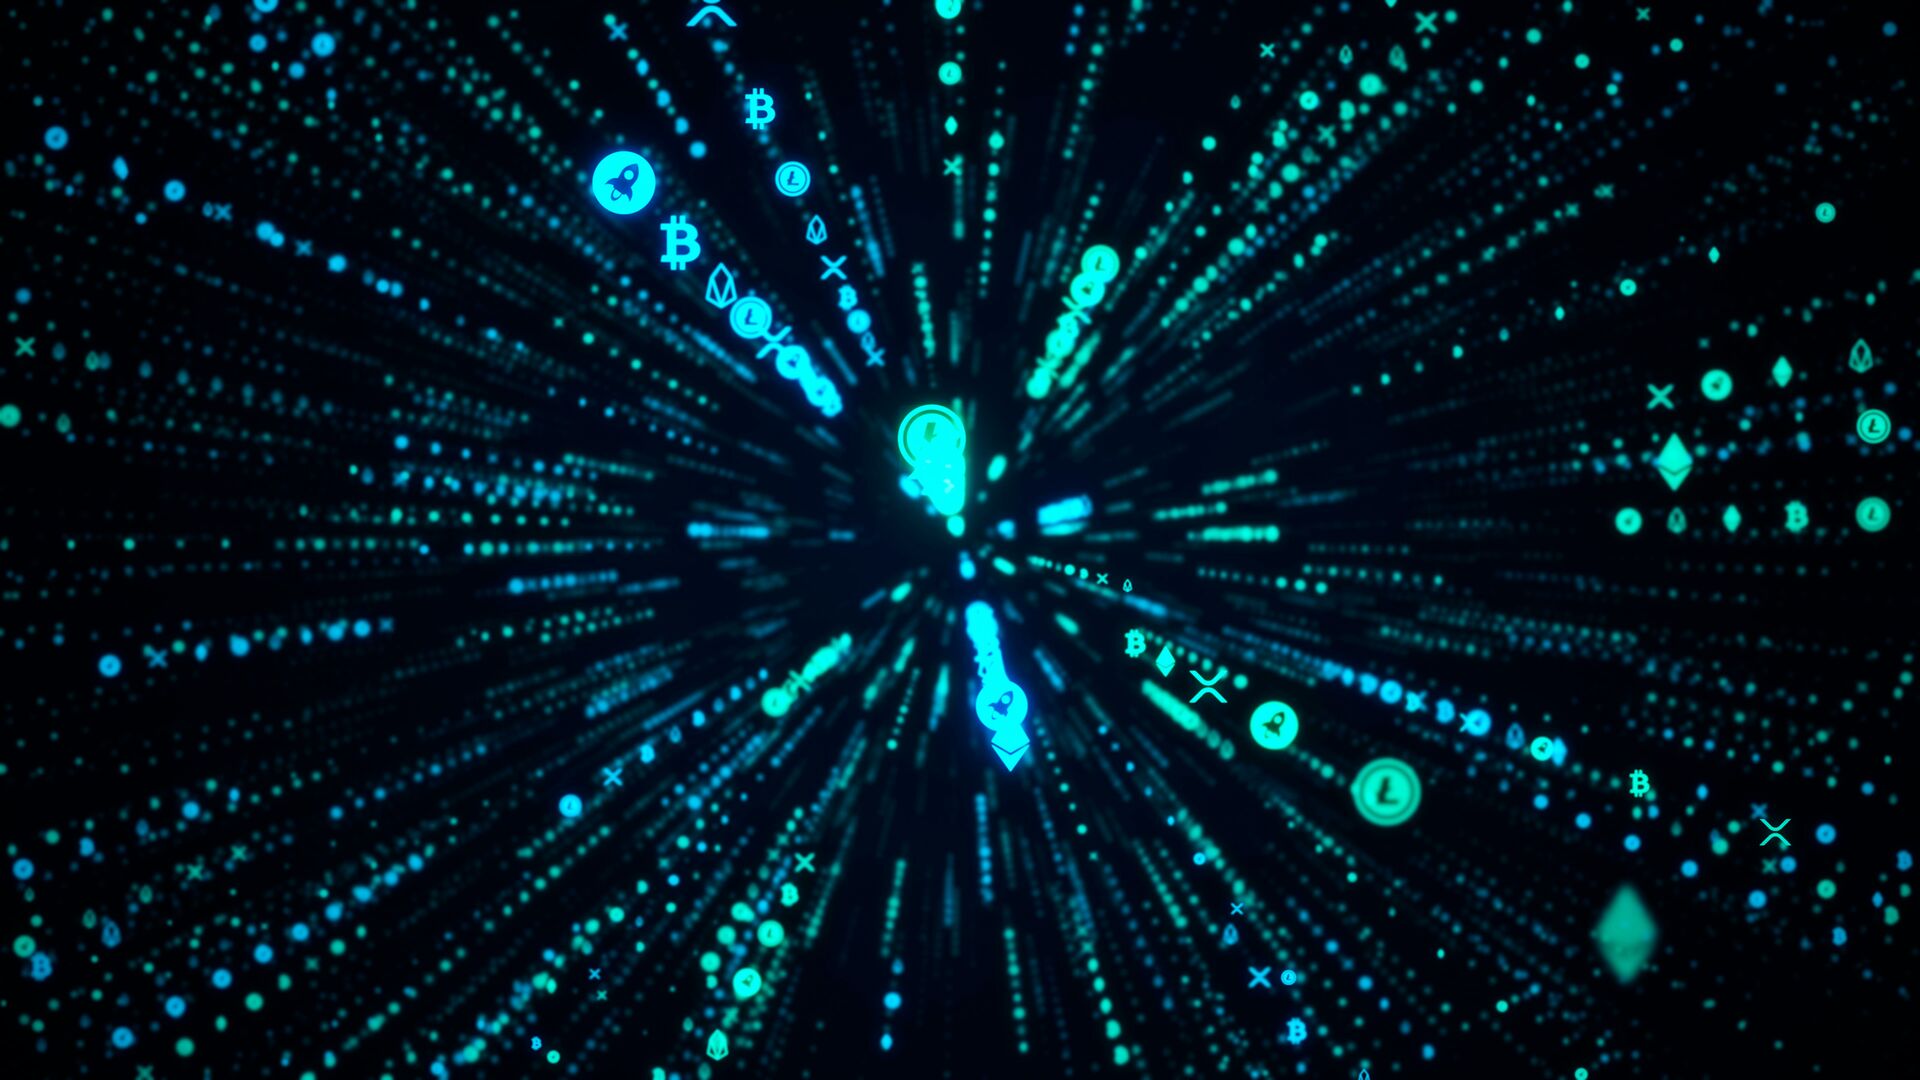 Bitcoin, blockchain and other digital currencies are tunneling through a black void like streaks of light in blue and blue-green, representing rapid innovation in the space.